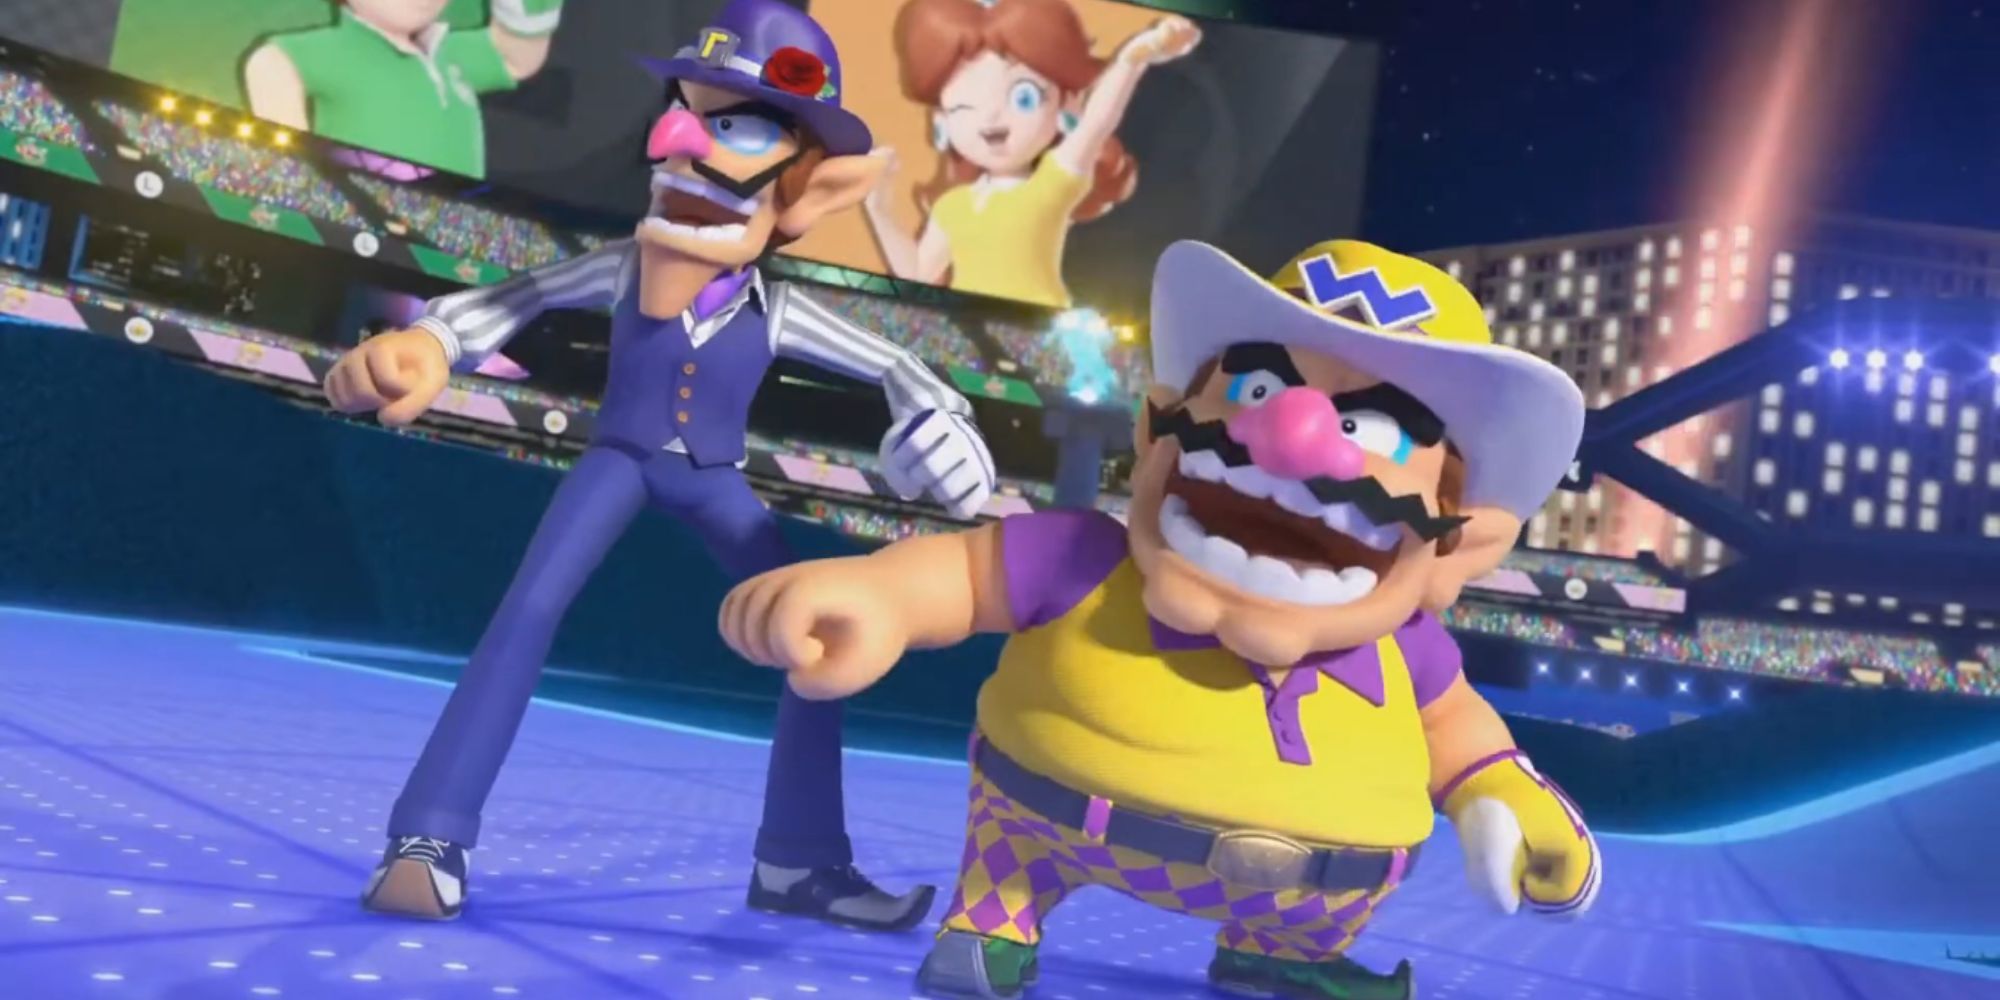 Wario and Waluigi stand outside a tennis court together in Mario Tennis Aces